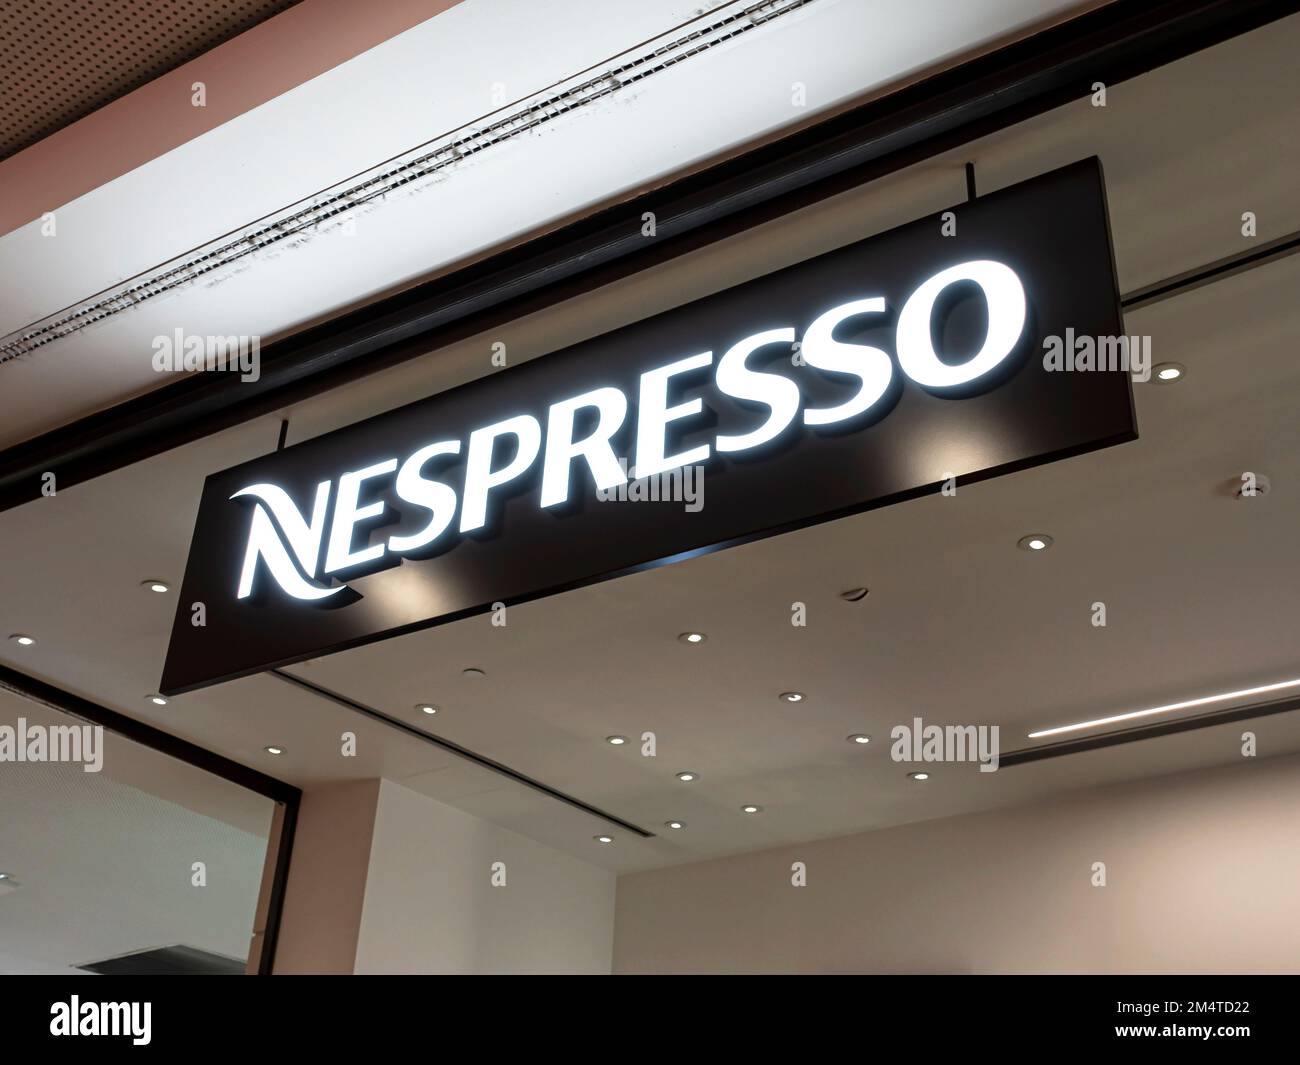 Funchal, Portugal - Oct 23, 2021: Nespresso store sign. Nespresso is an operating unit of the Nestlé Group, based in Lausanne, Switzerland. Stock Photo